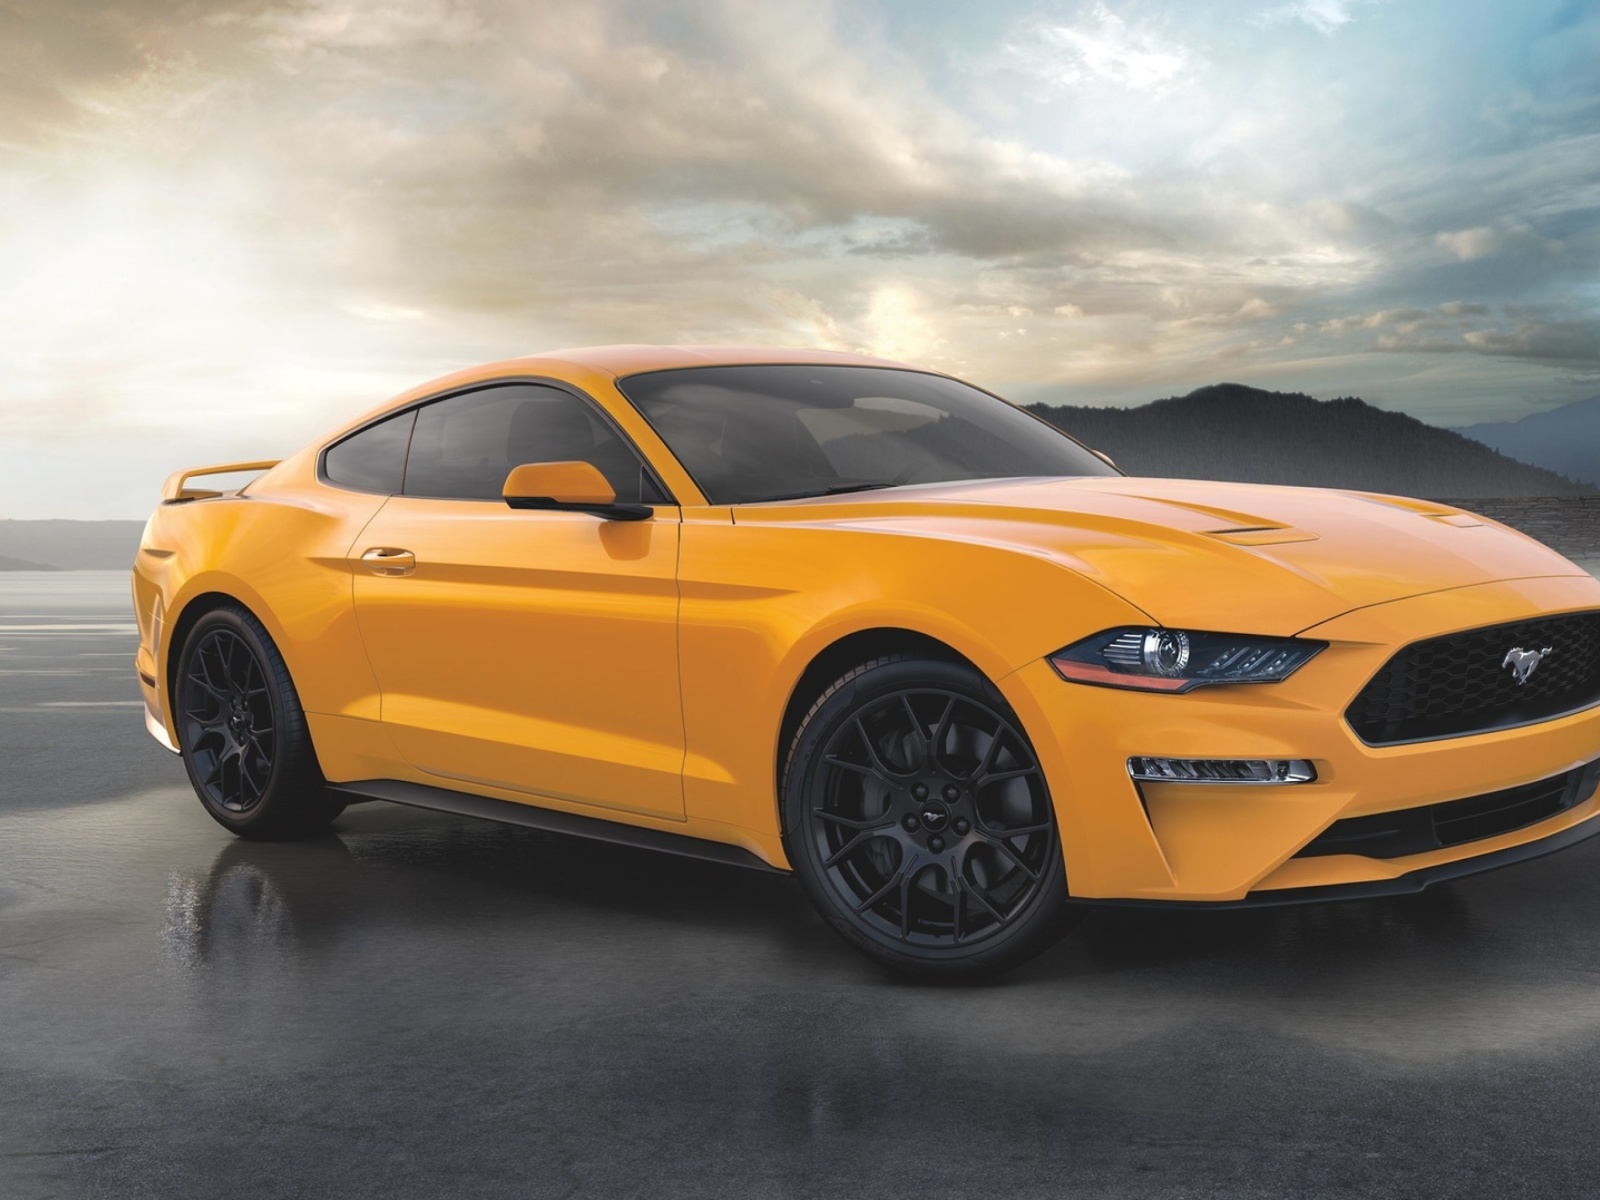 Ford Mustang Coupe wallpaper 1600x1200